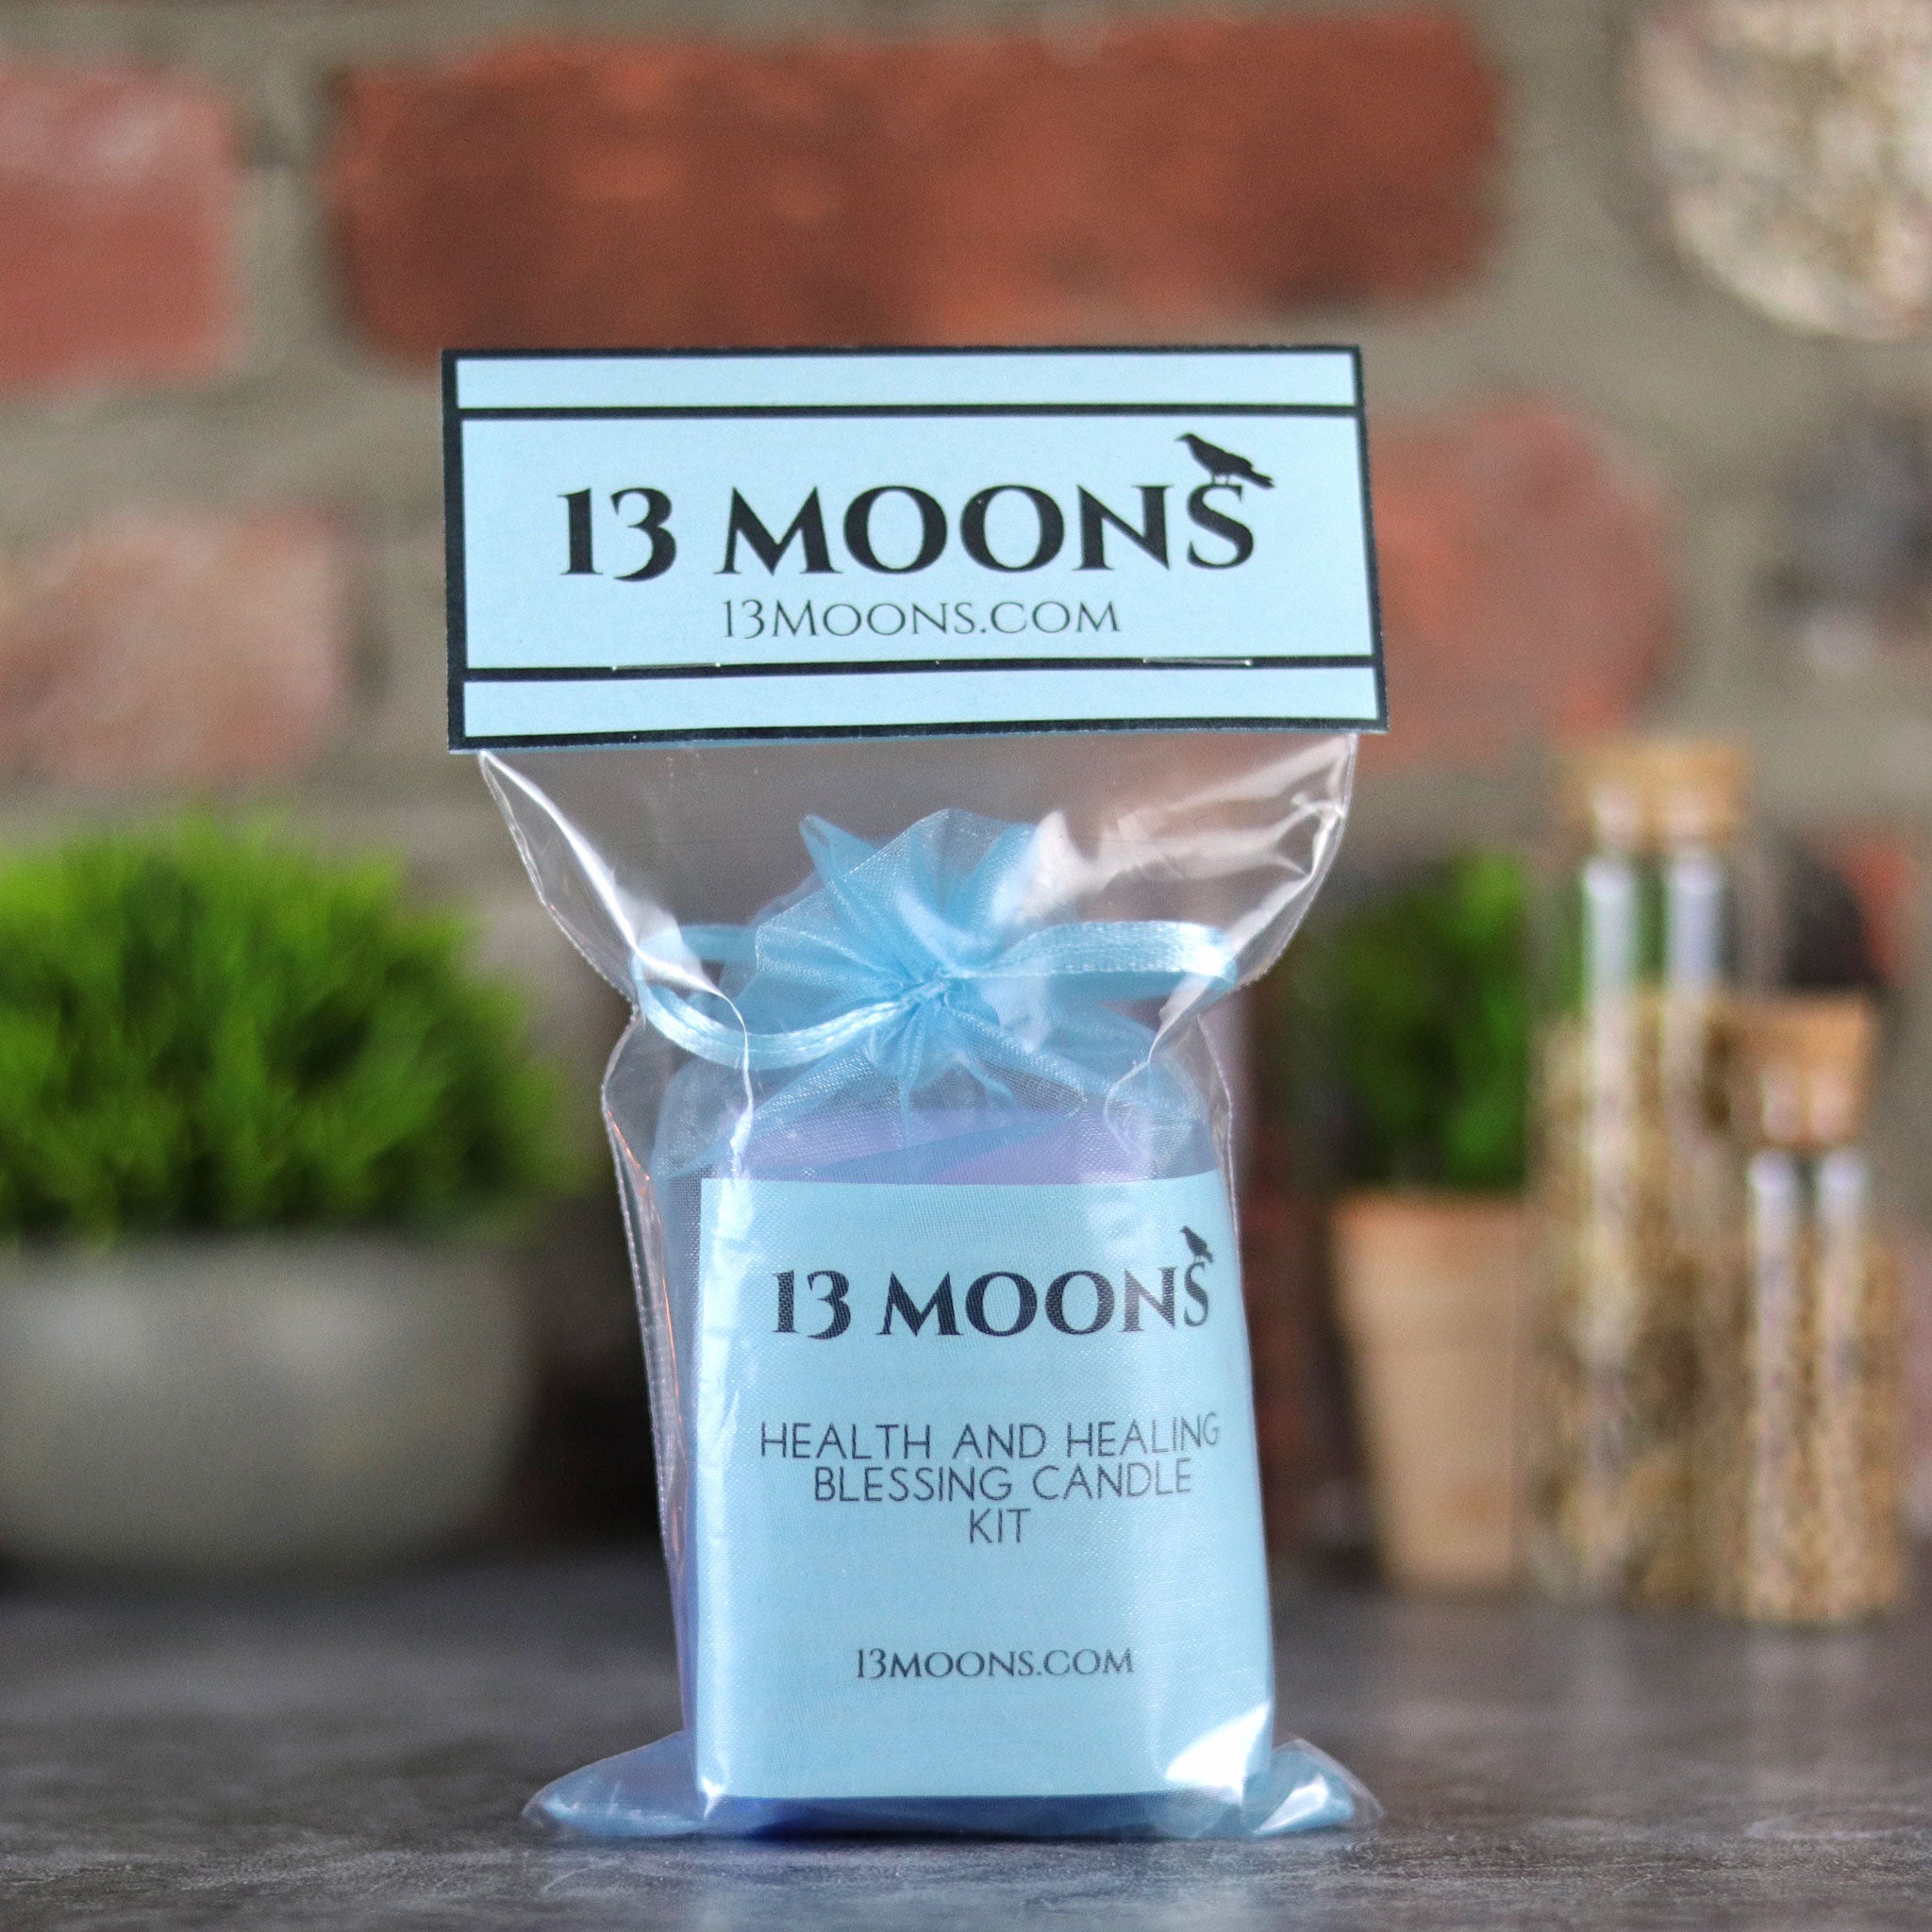 Health and Healing Blessing Candle Kit - 13 Moons